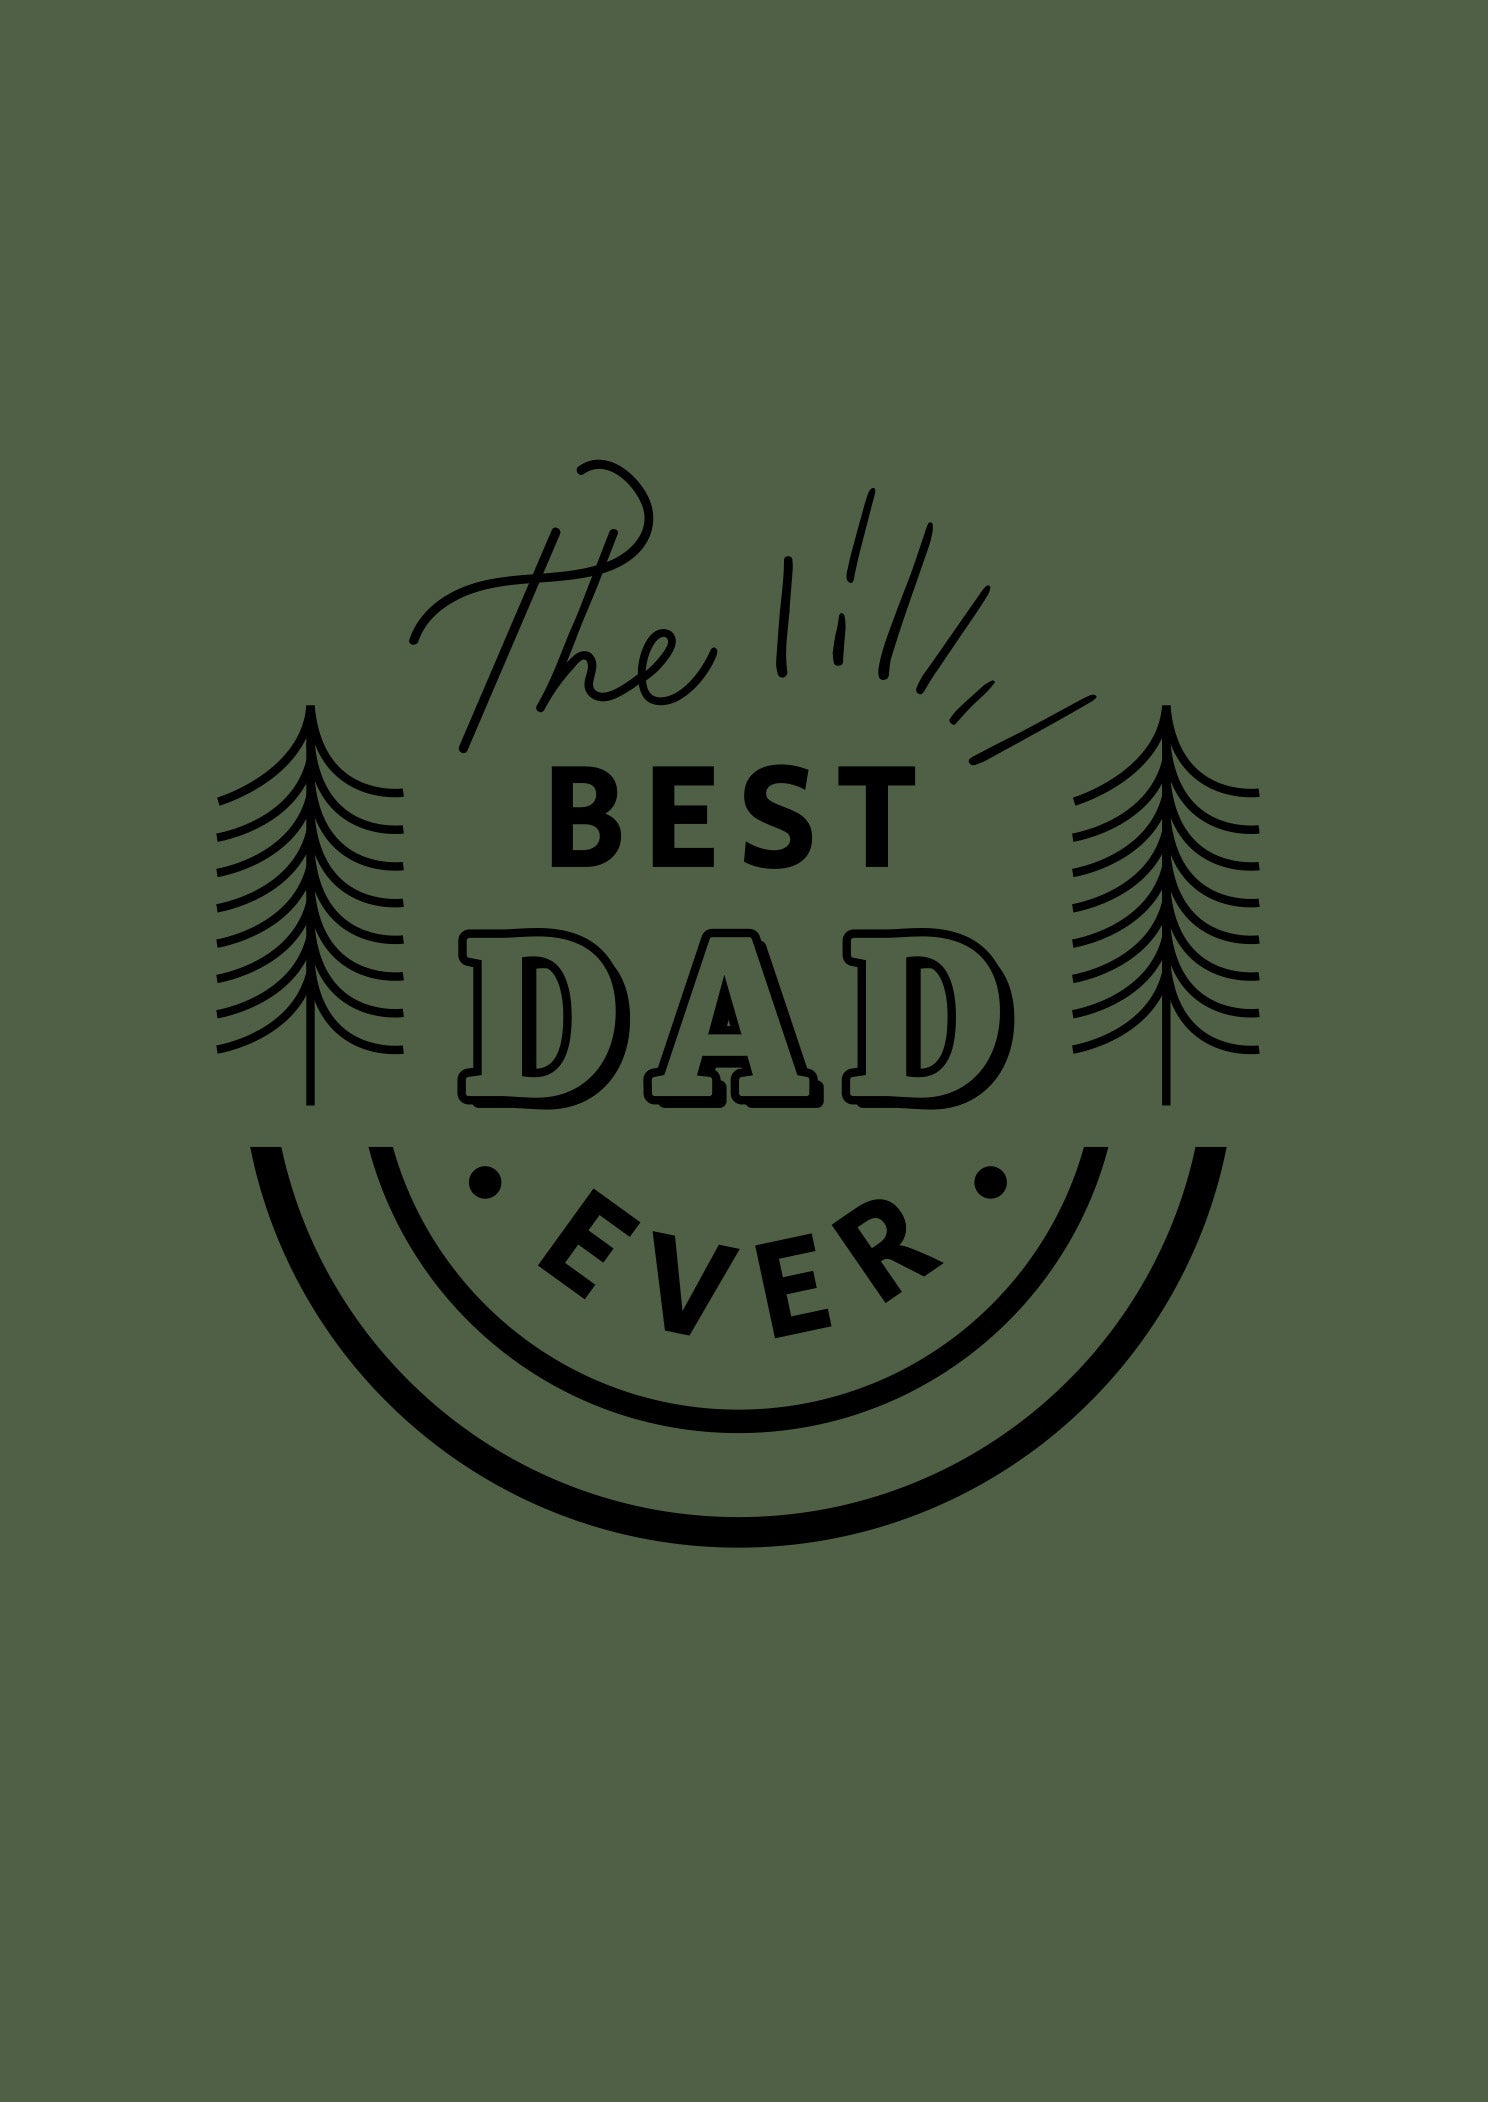 Greeting Card LEGEND - THE BEST DAD